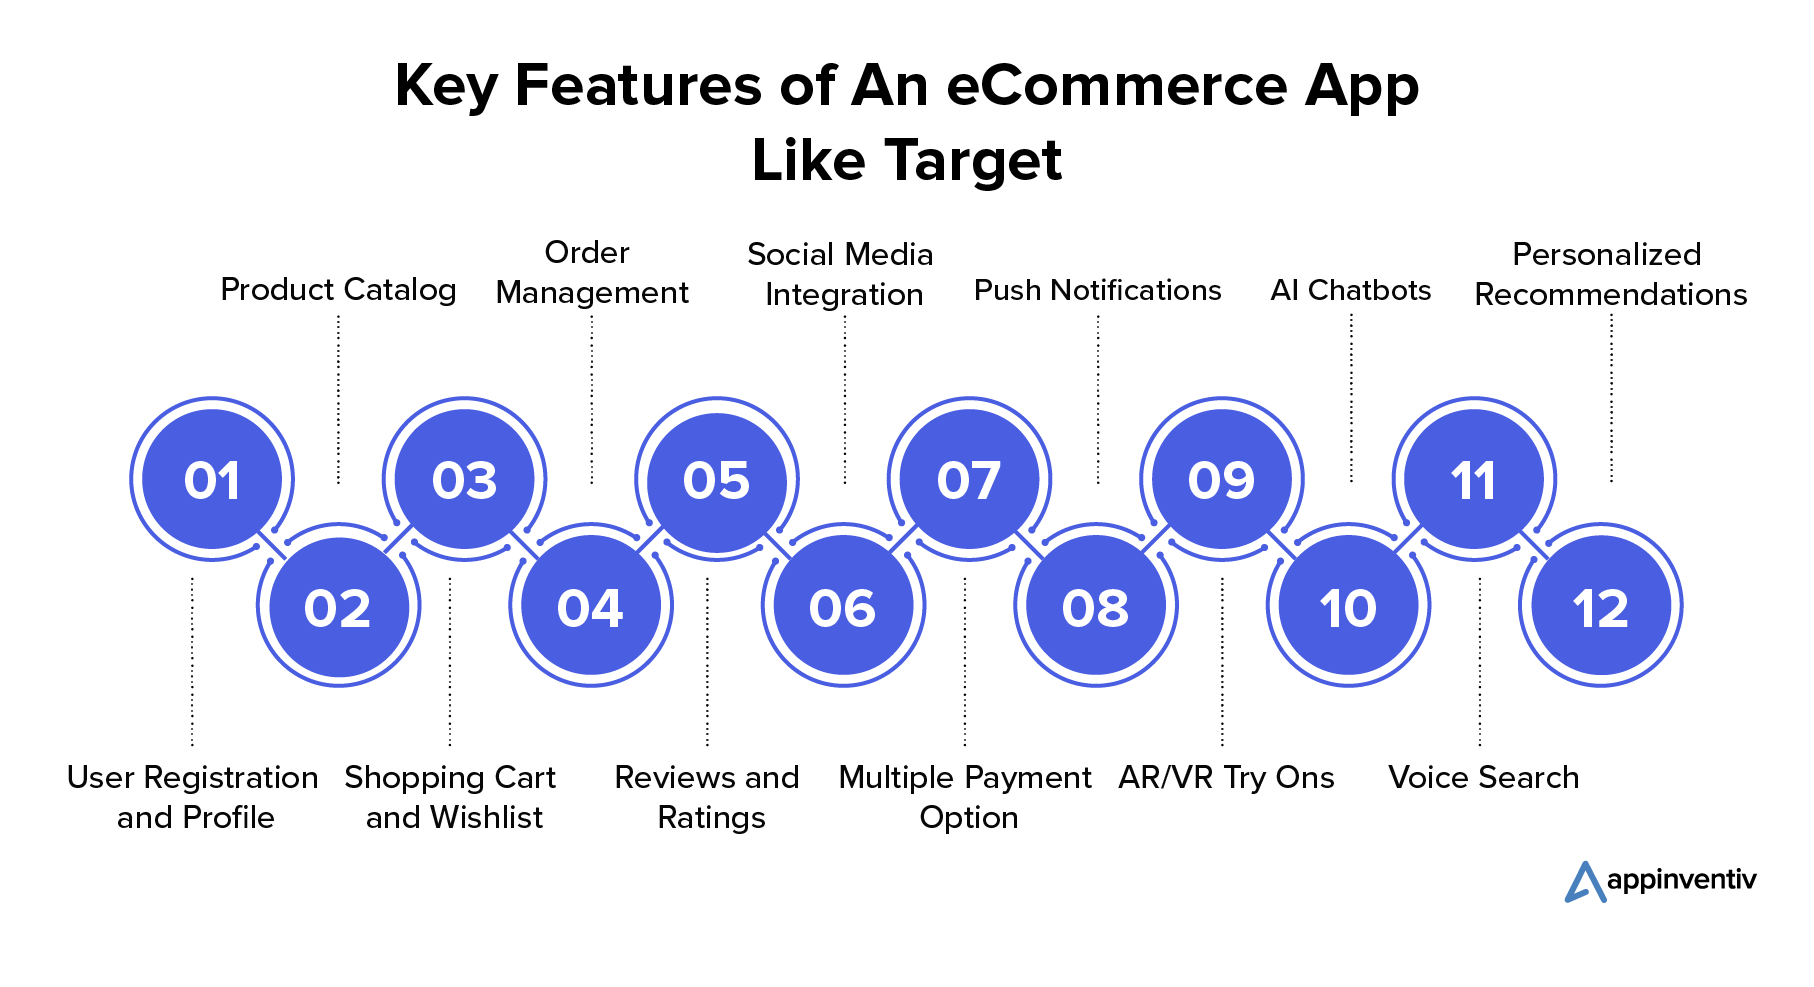 Key Features of An eCommerce App Like Target
